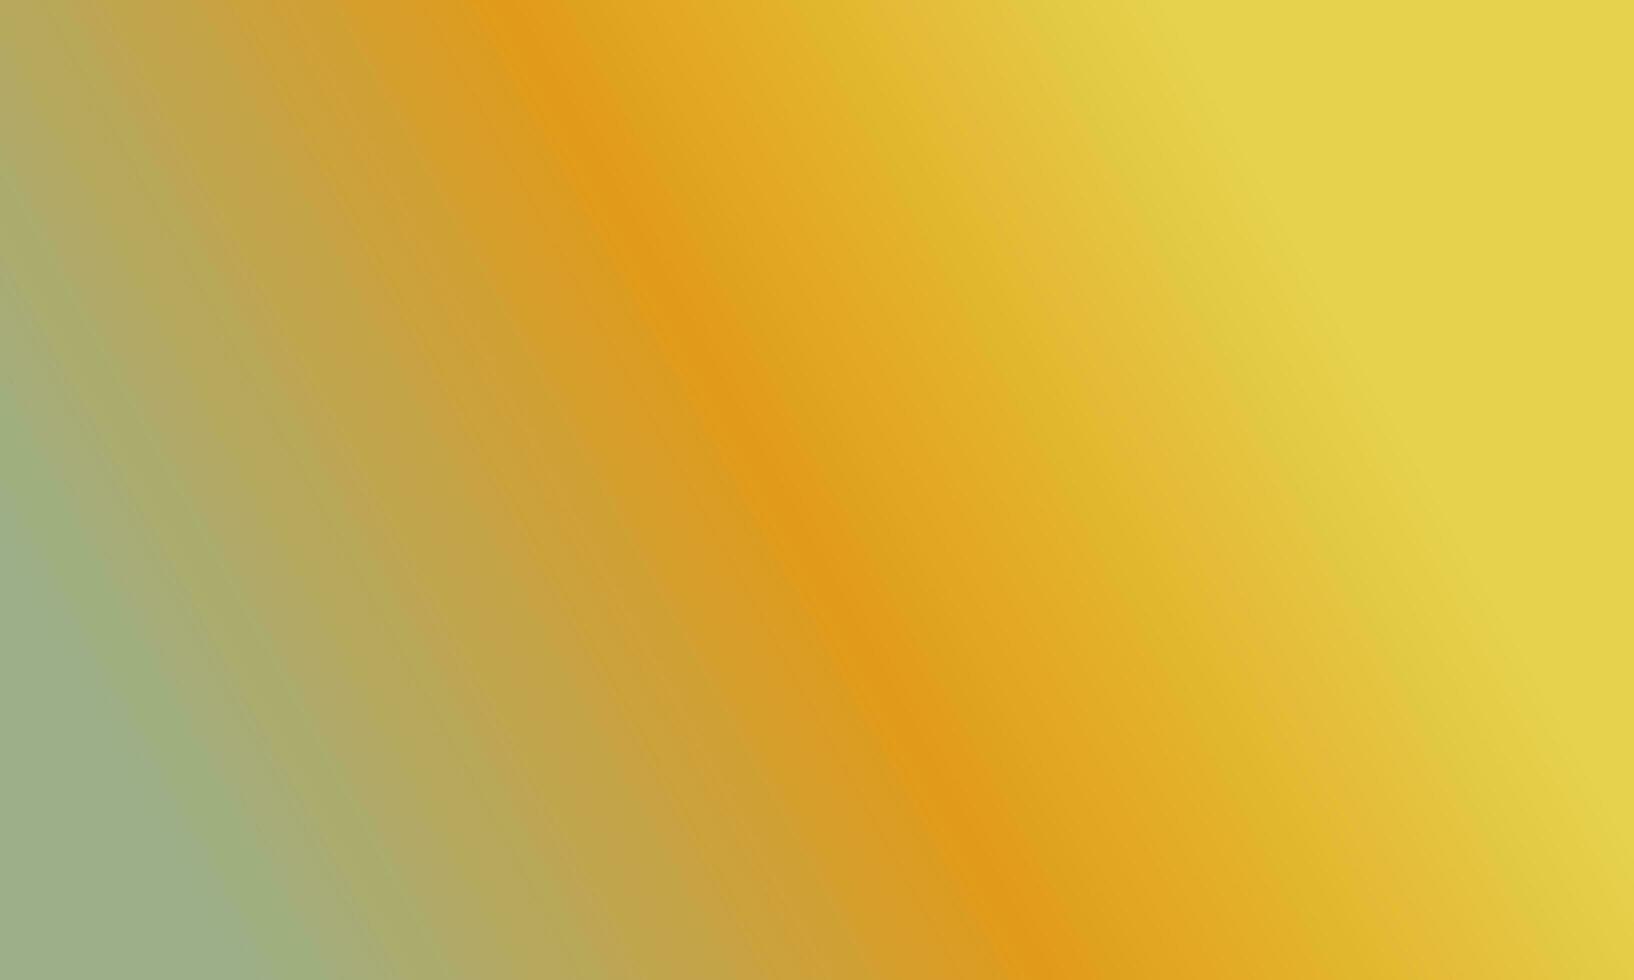 Design simple sage green,orange and yellow gradient color illustration background photo